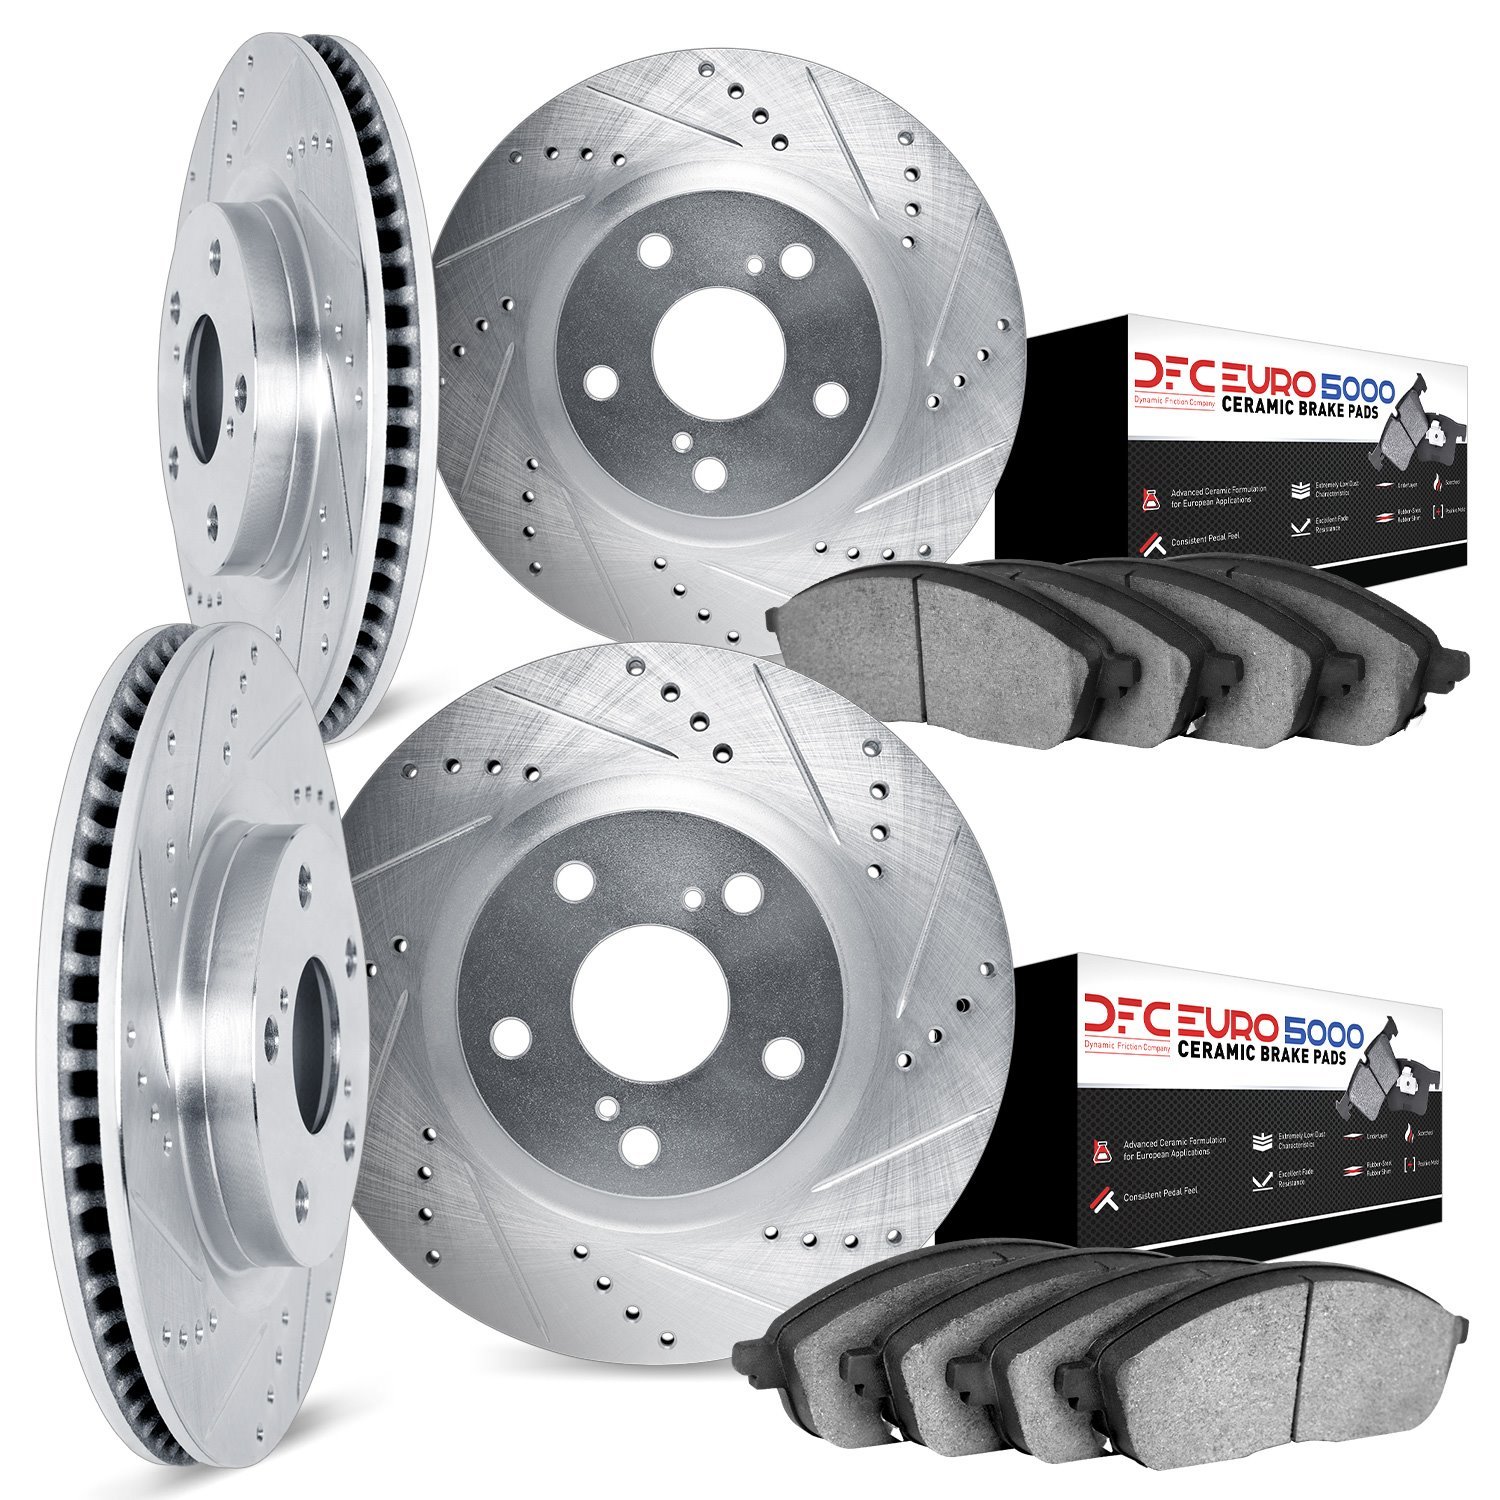 7604-02001 Drilled/Slotted Brake Rotors w/5000 Euro Ceramic Brake Pads Kit [Silver], 1969-1977 Porsche, Position: Front and Rear